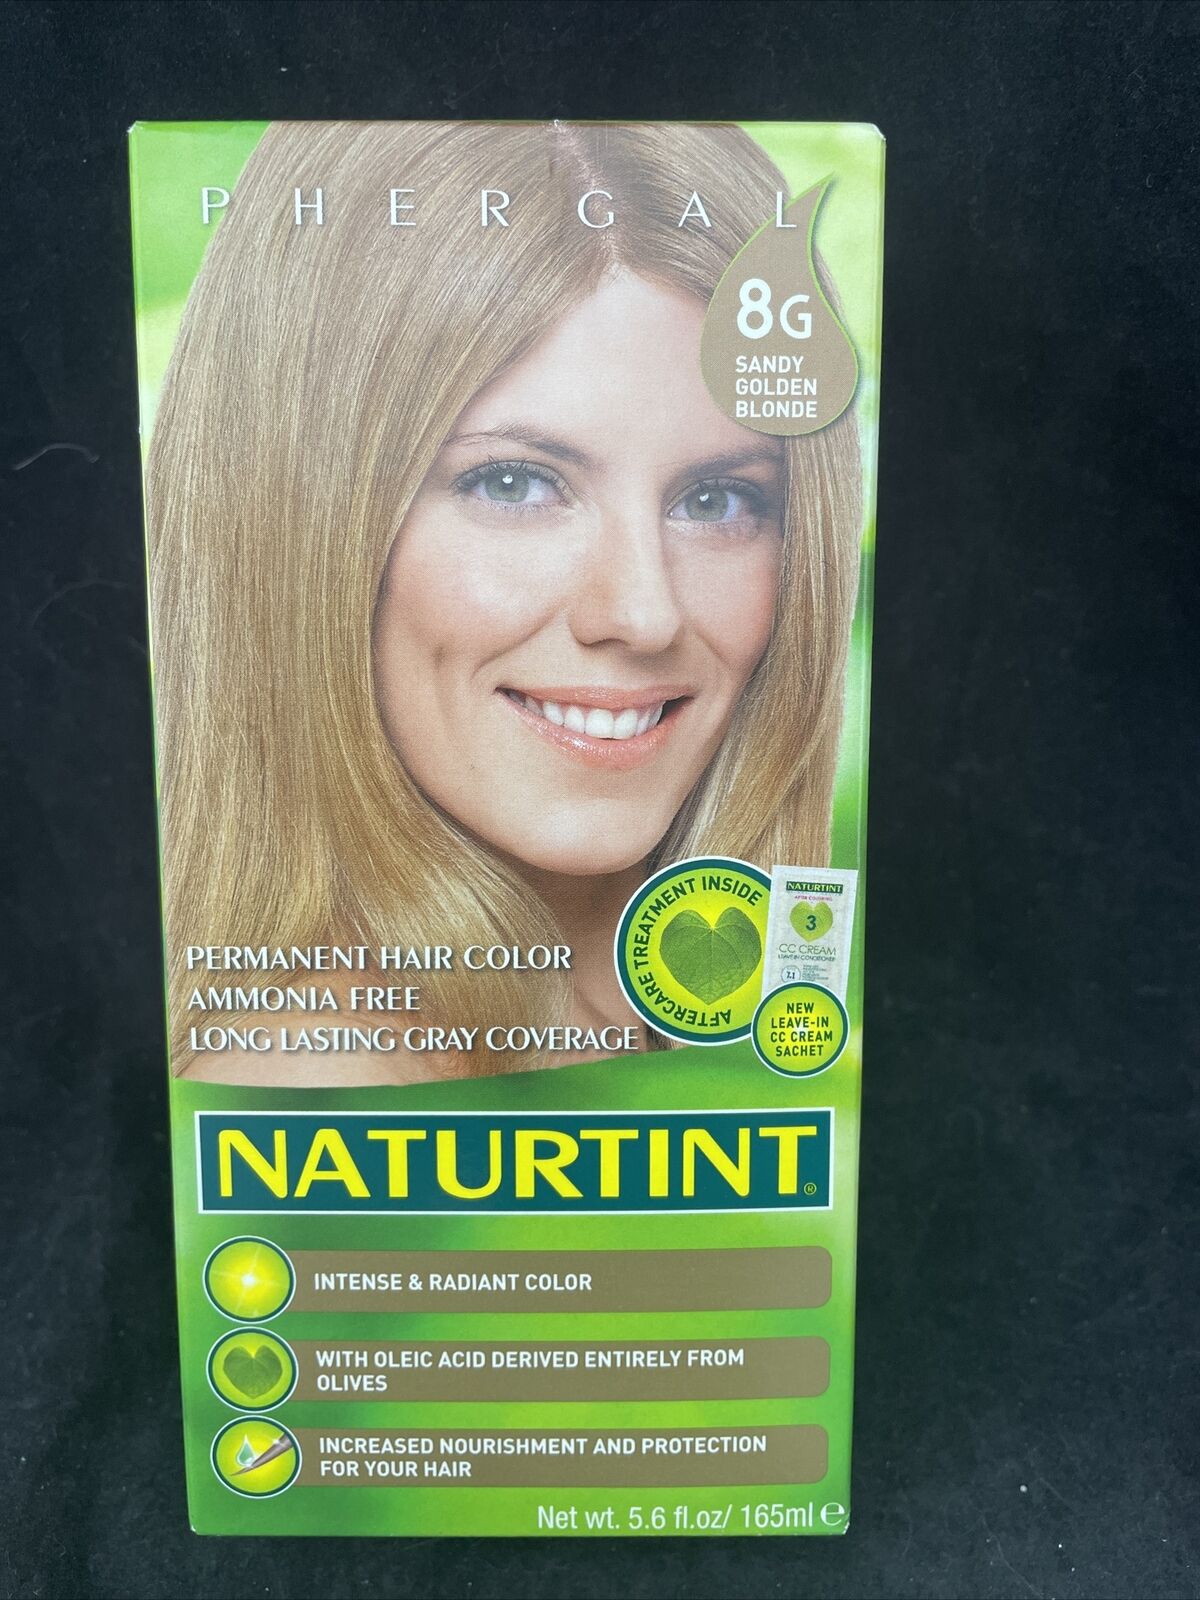 Permanent Hair Colorant Sandy Golden Blonde (8G) by Naturtint, 1 piece